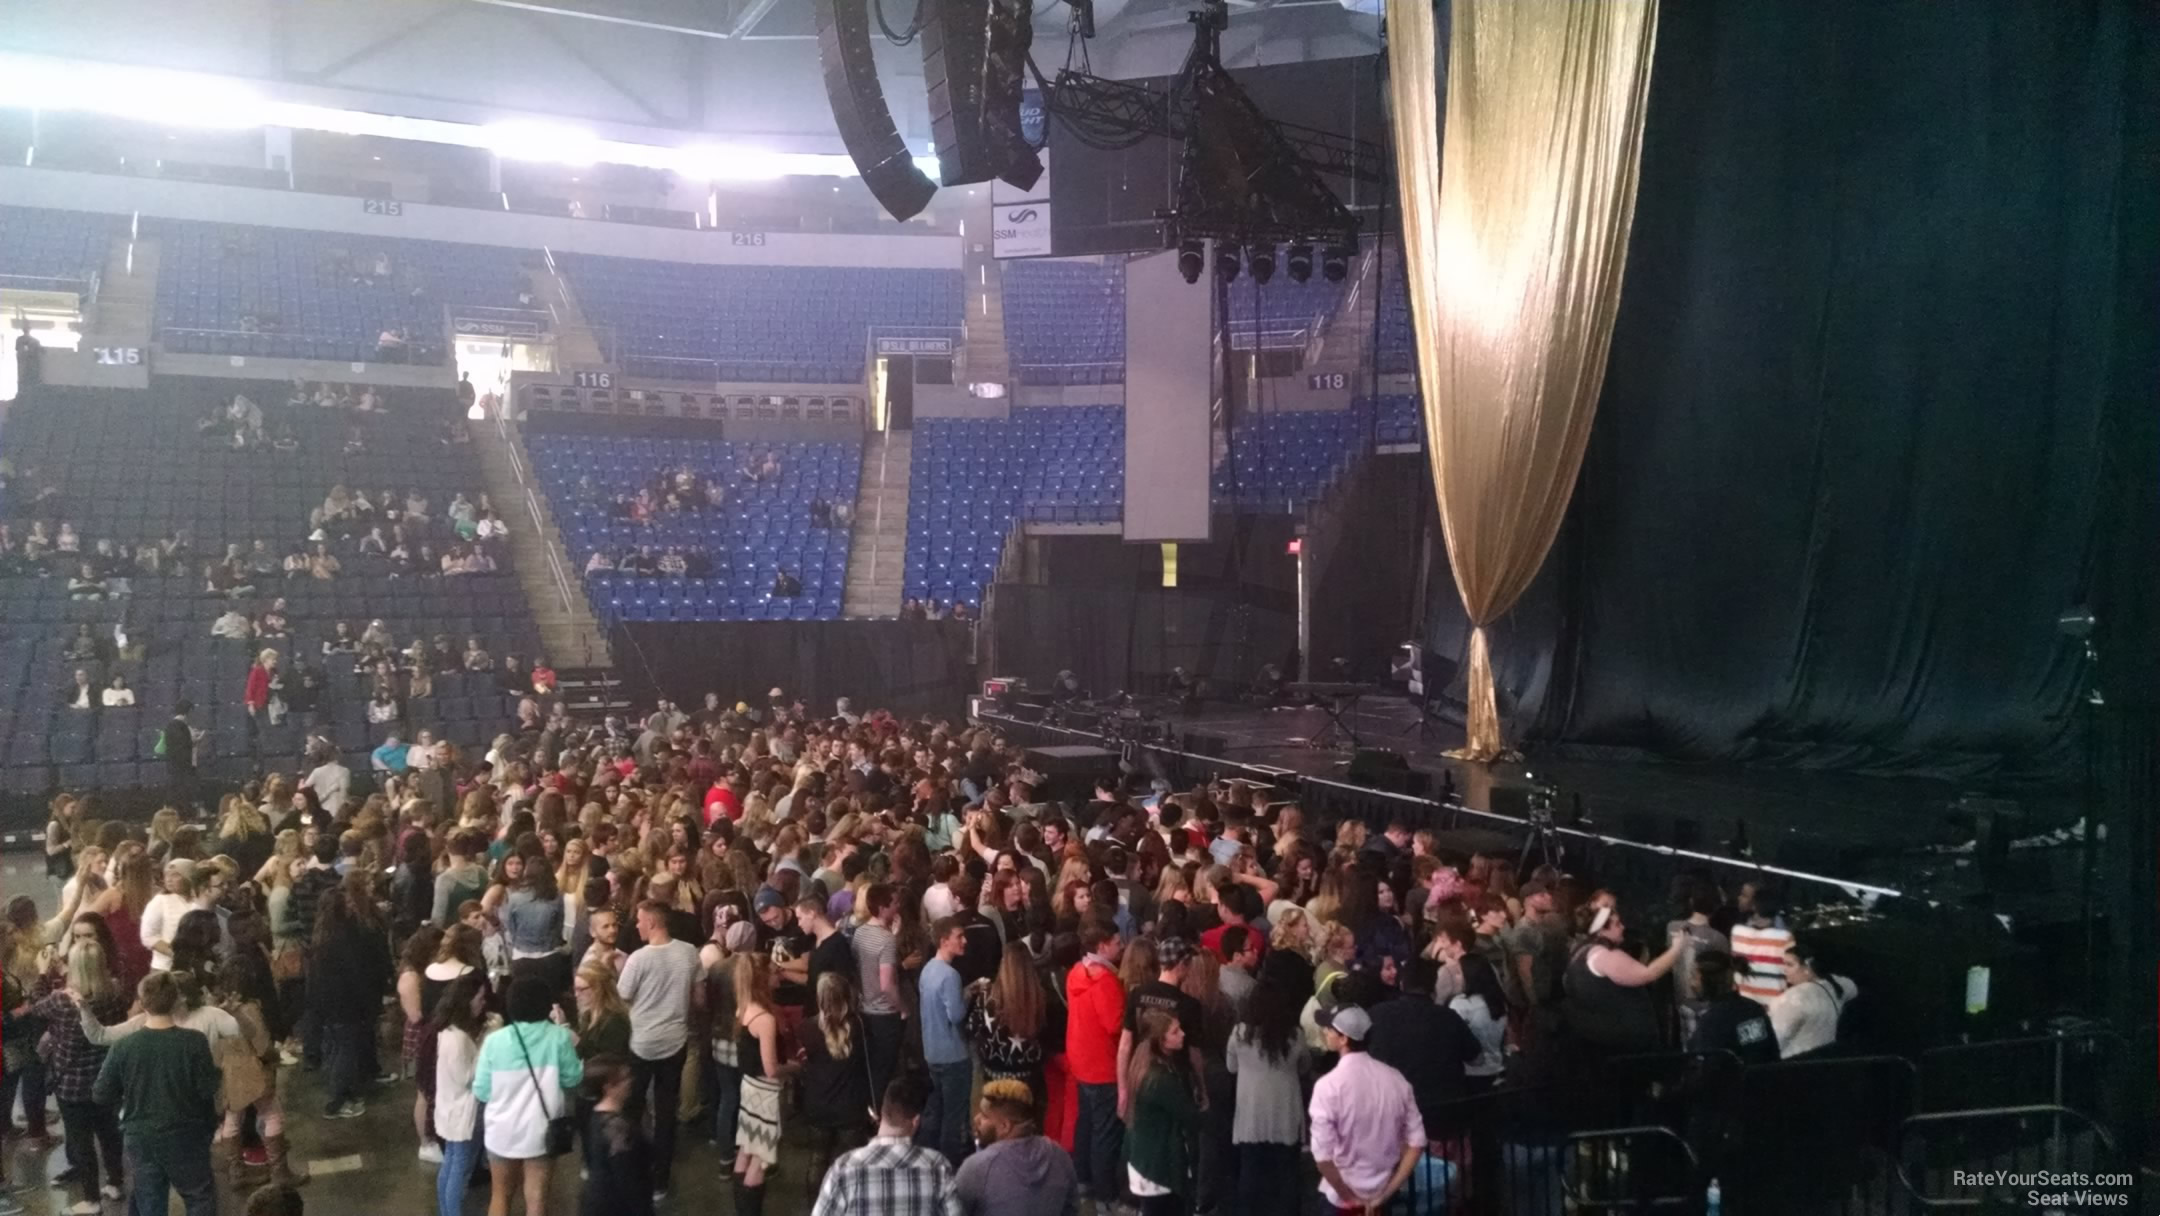 section 103, row h seat view  for concert - chaifetz arena